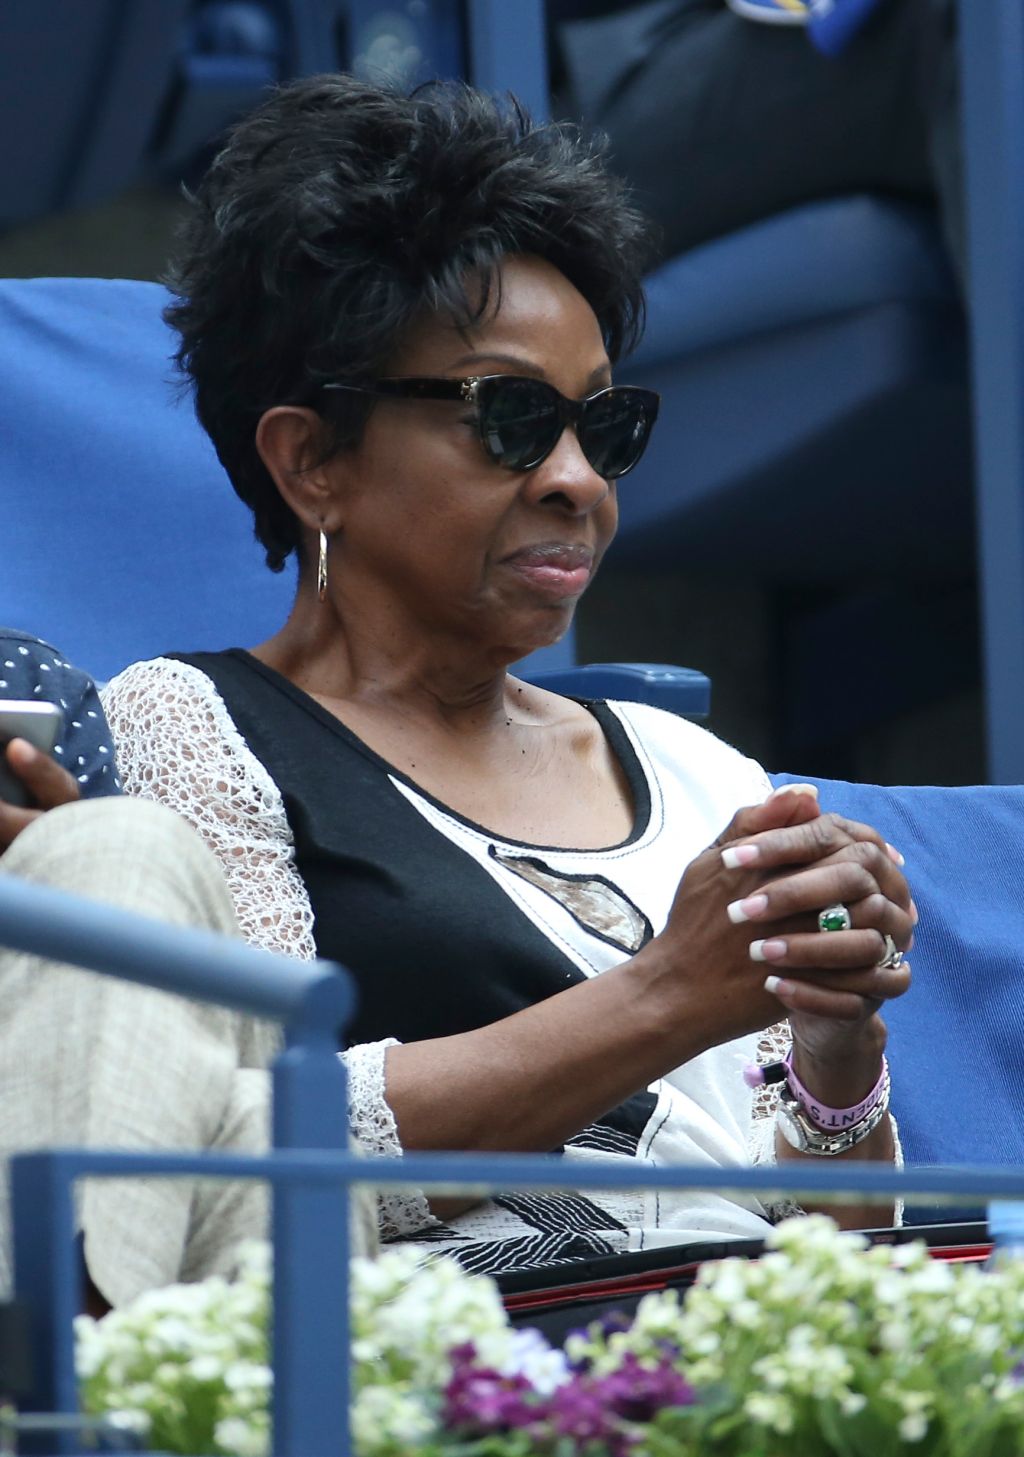 Celebrities Attend The 2018 US Open Tennis Championships - Day 2